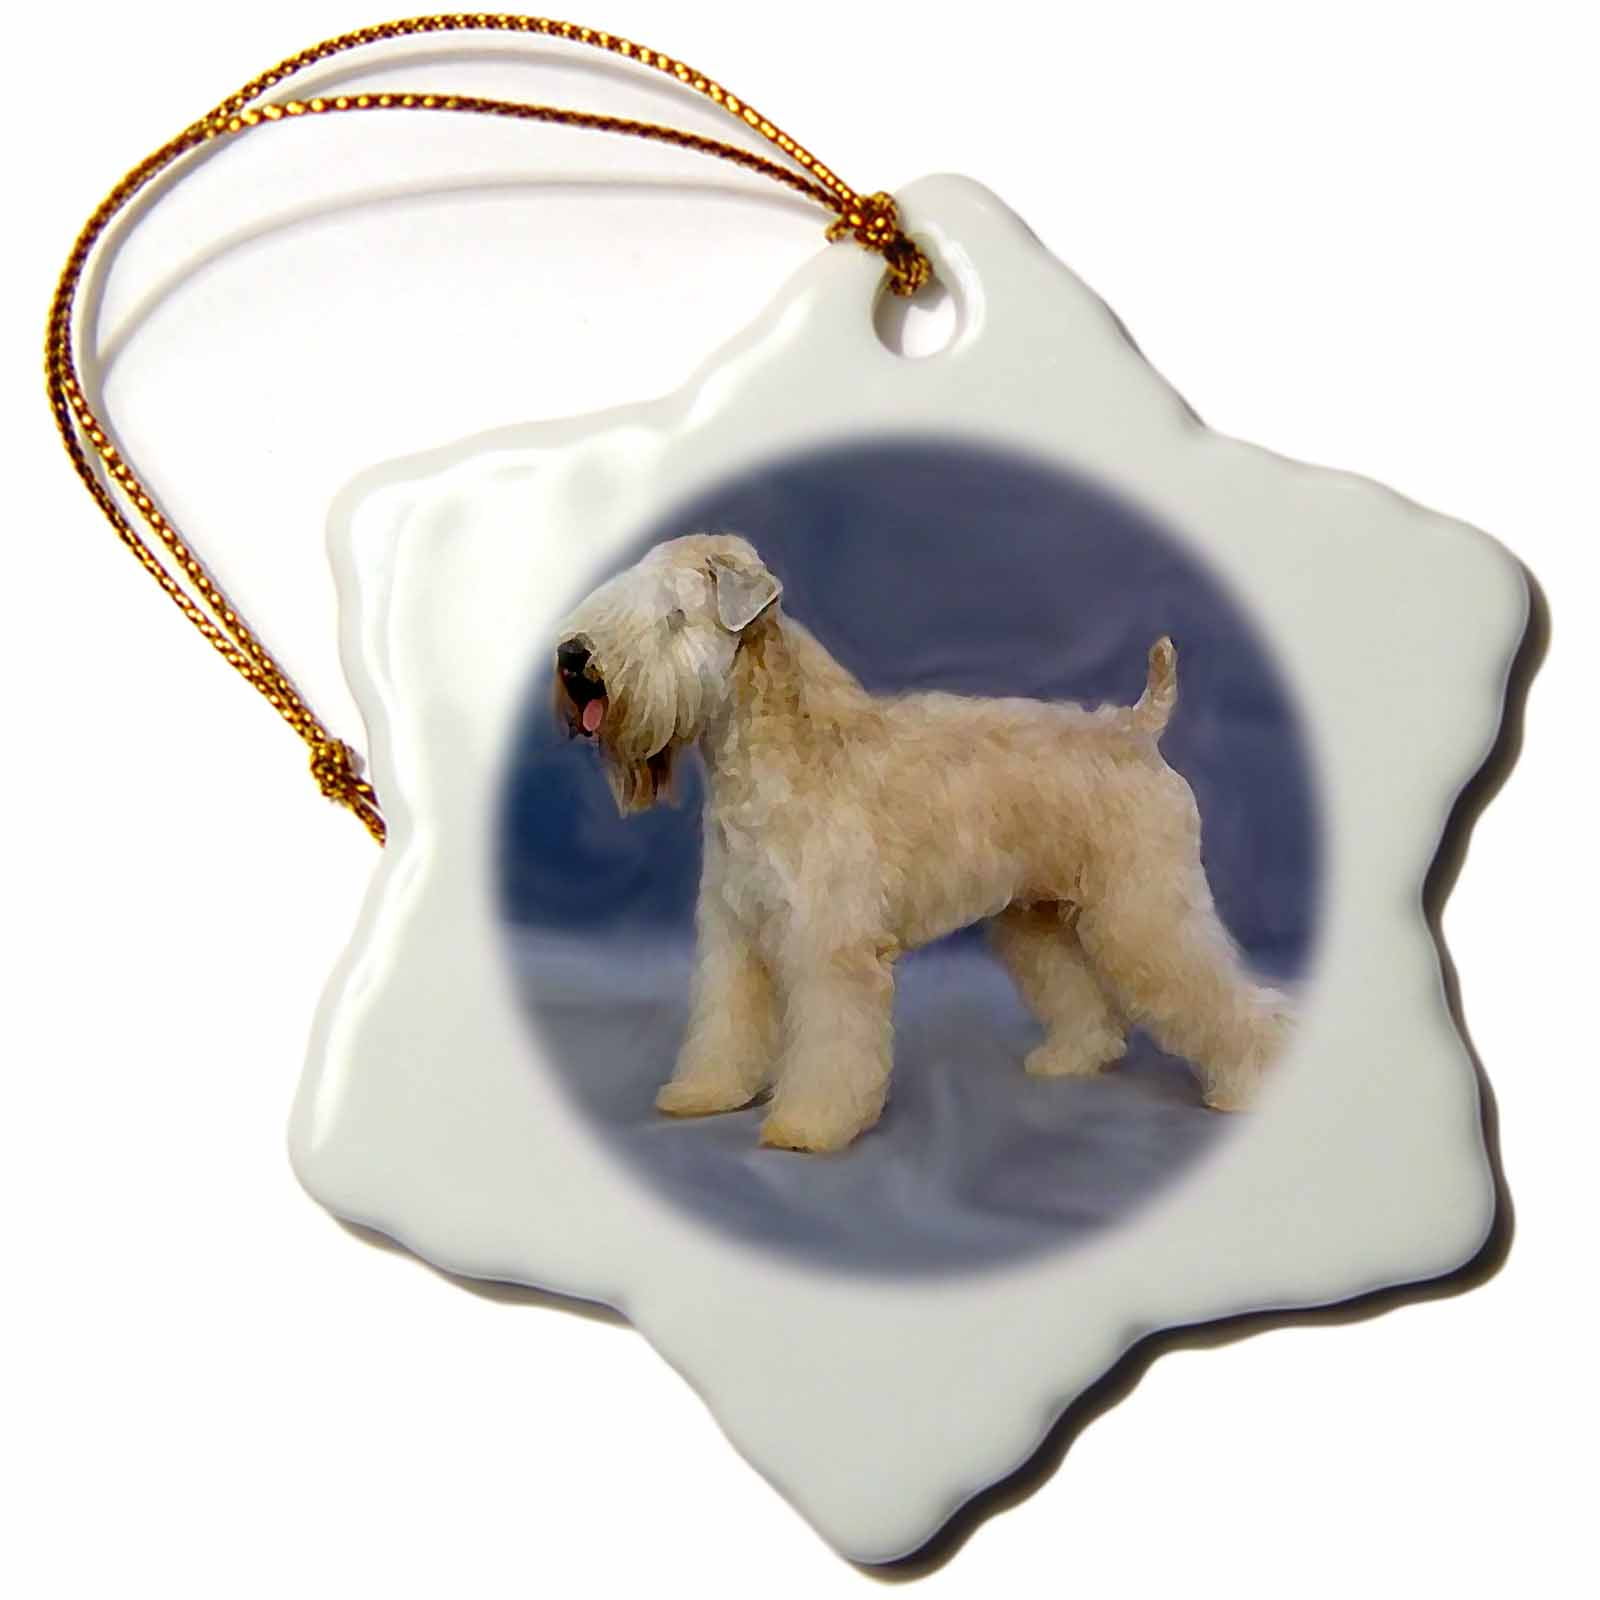 3dRose Soft Coated Wheaten Terrier - Snowflake Ornament, 3-inch ...